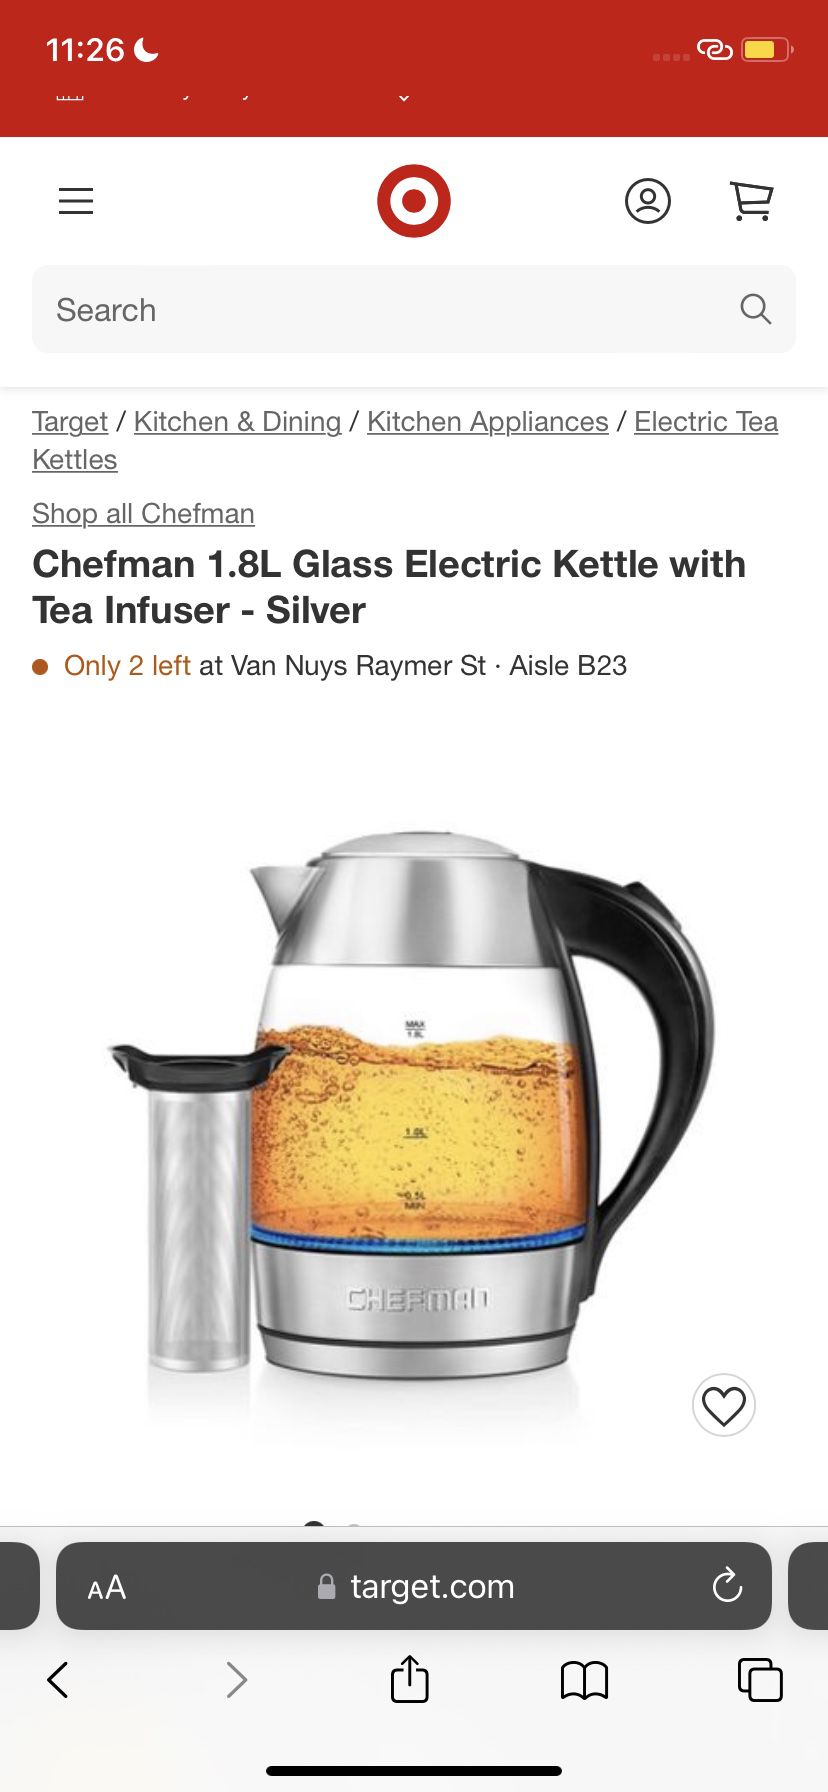 Chefman 1.8L Glass Electric Kettle - Silver